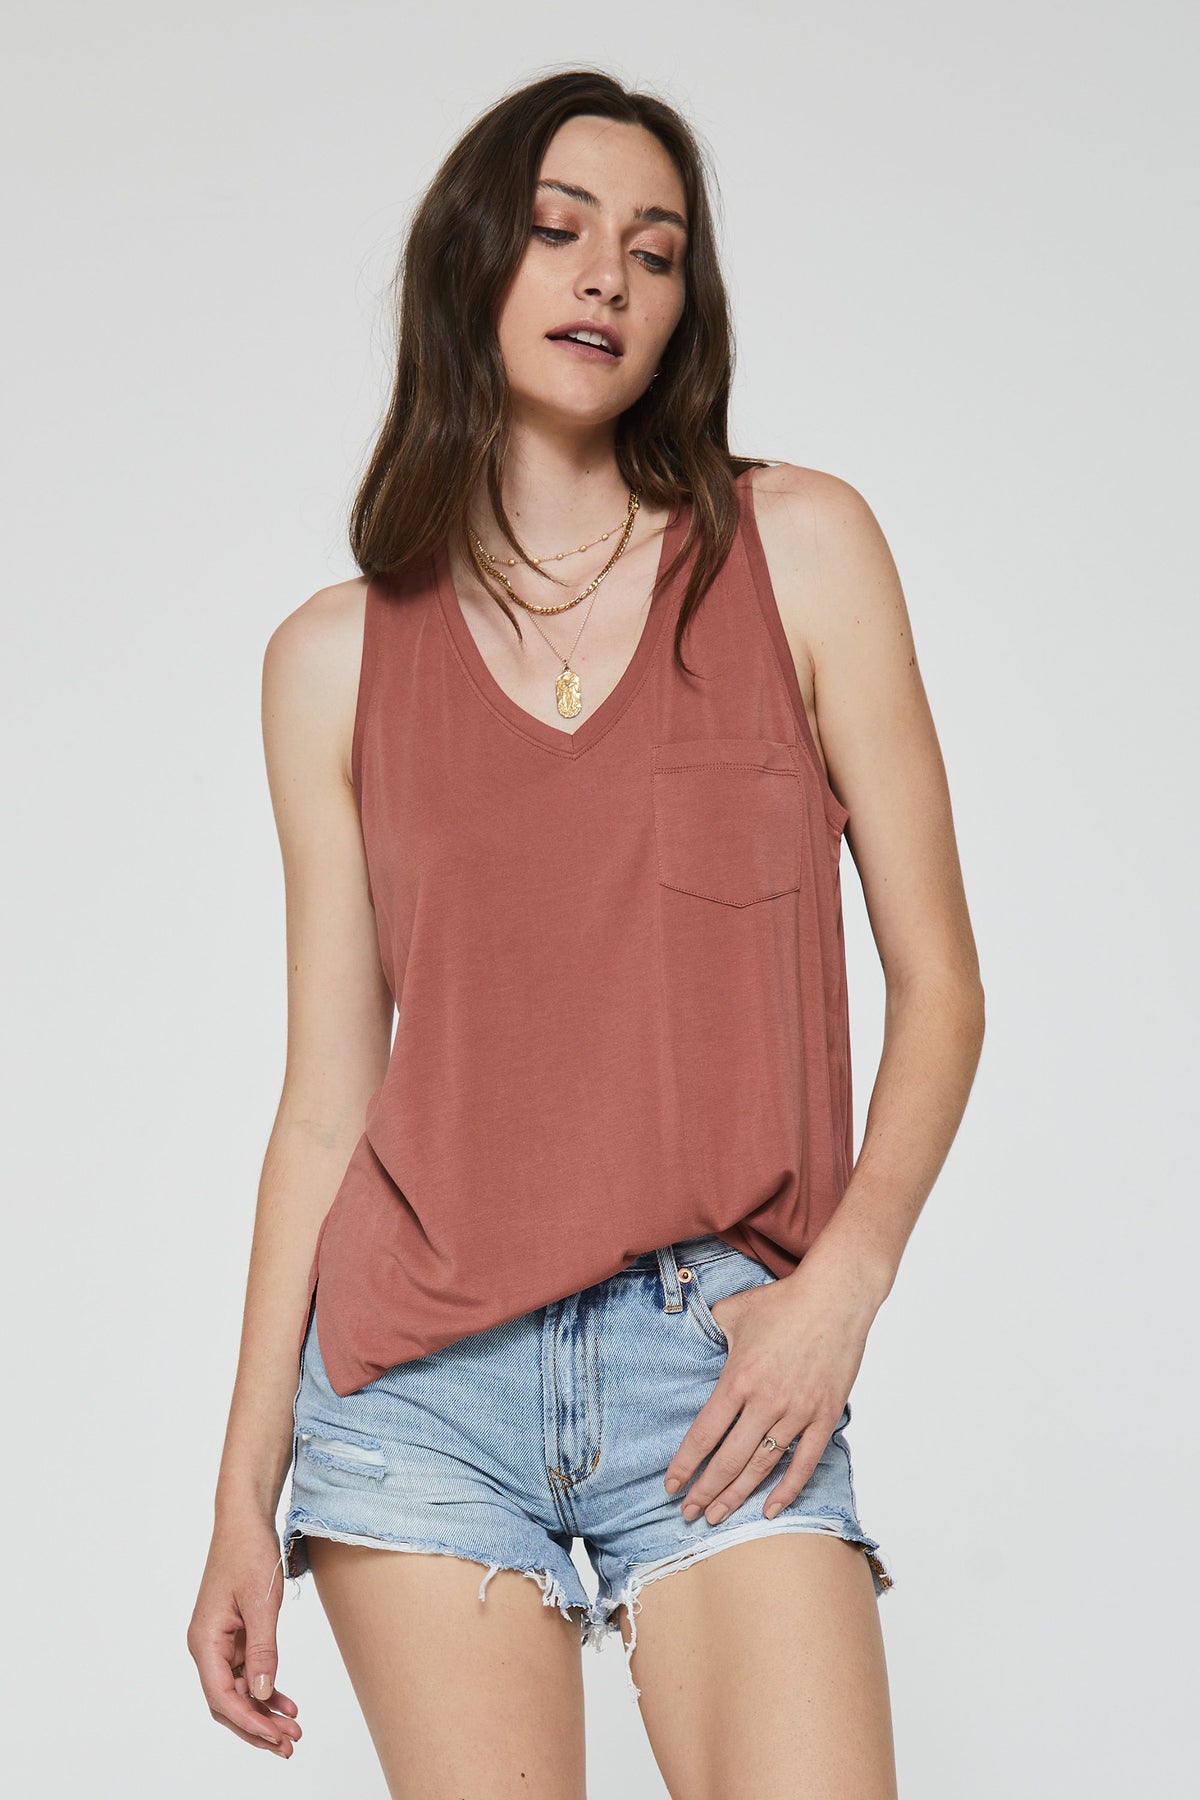 Another Love Esther Adobe Tank Shirts & Tops - The Attic Boutique